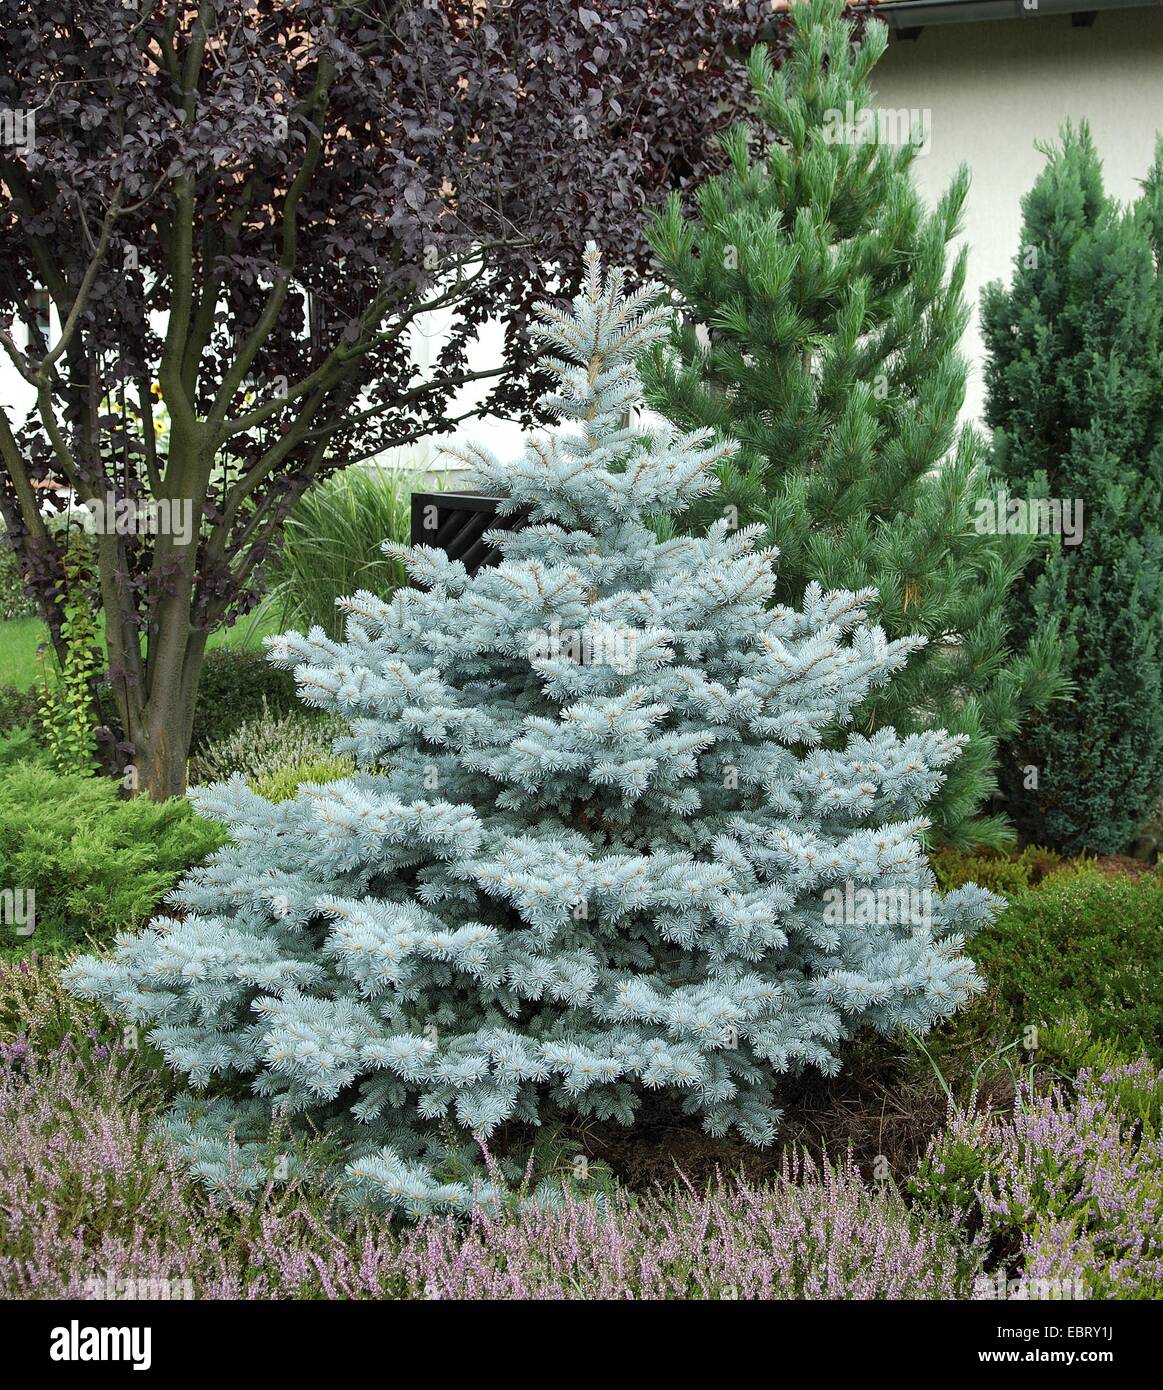 Colorado blue spruce (Picea pungens 'Koster', Picea pungens Koster), cultivar Koster Stock Photo